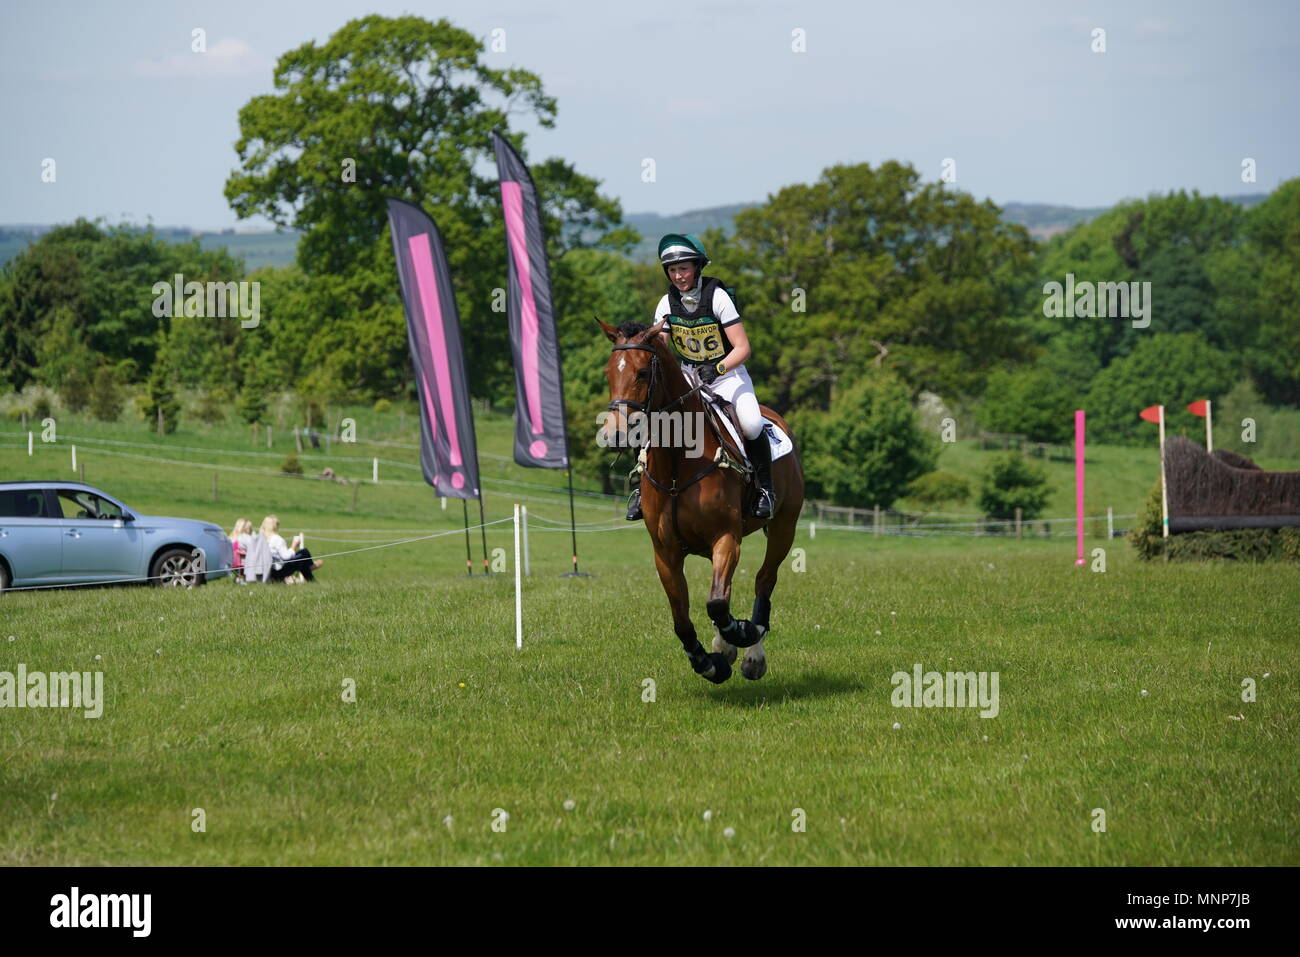 Corby, England. 18th May 2018. Horses and riders take part in the Fairfax & Favor International horse trials in the grounds of  Rockingham Castle, Corby, England 18 May 2018 Credit: Scott Carruthers/Alamy Live News Stock Photo